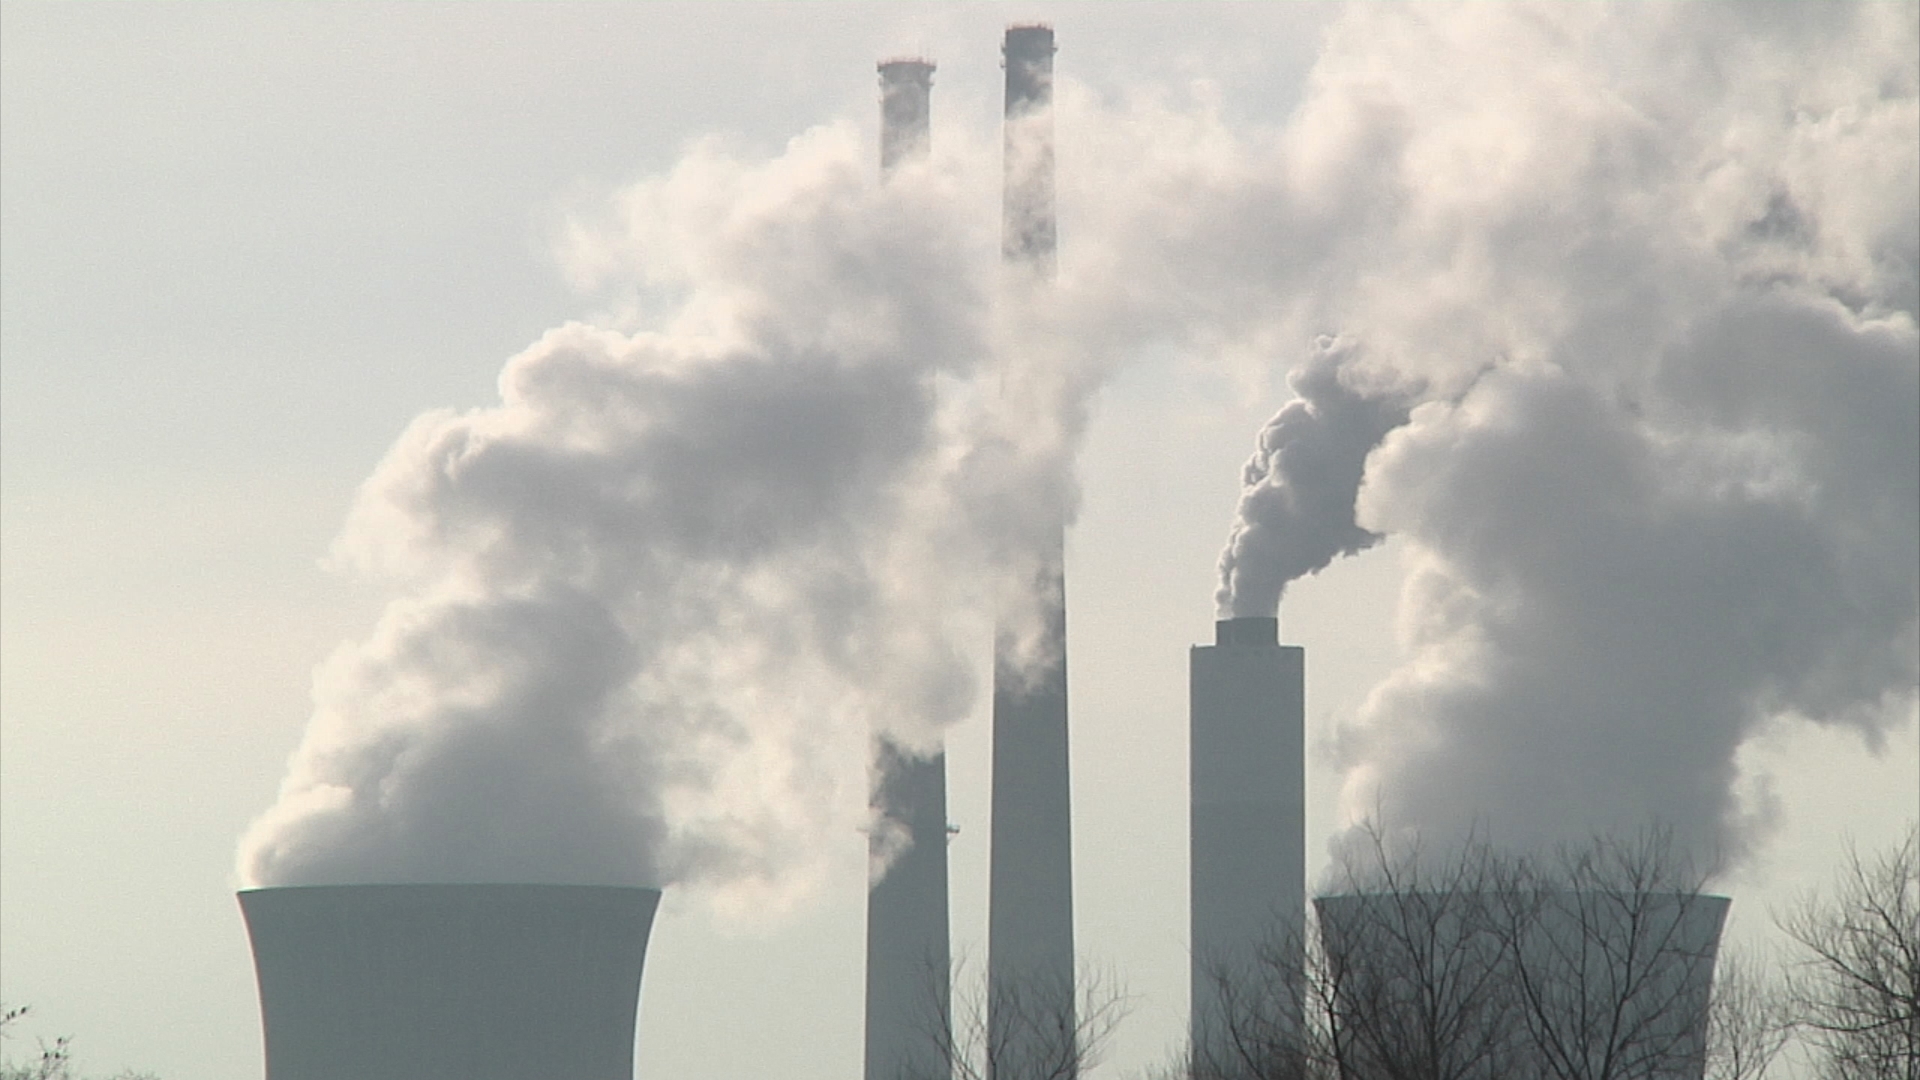 Sierra Club’s Karan May: Coal Plant Rescue Misses Out On ‘Bigger Picture’